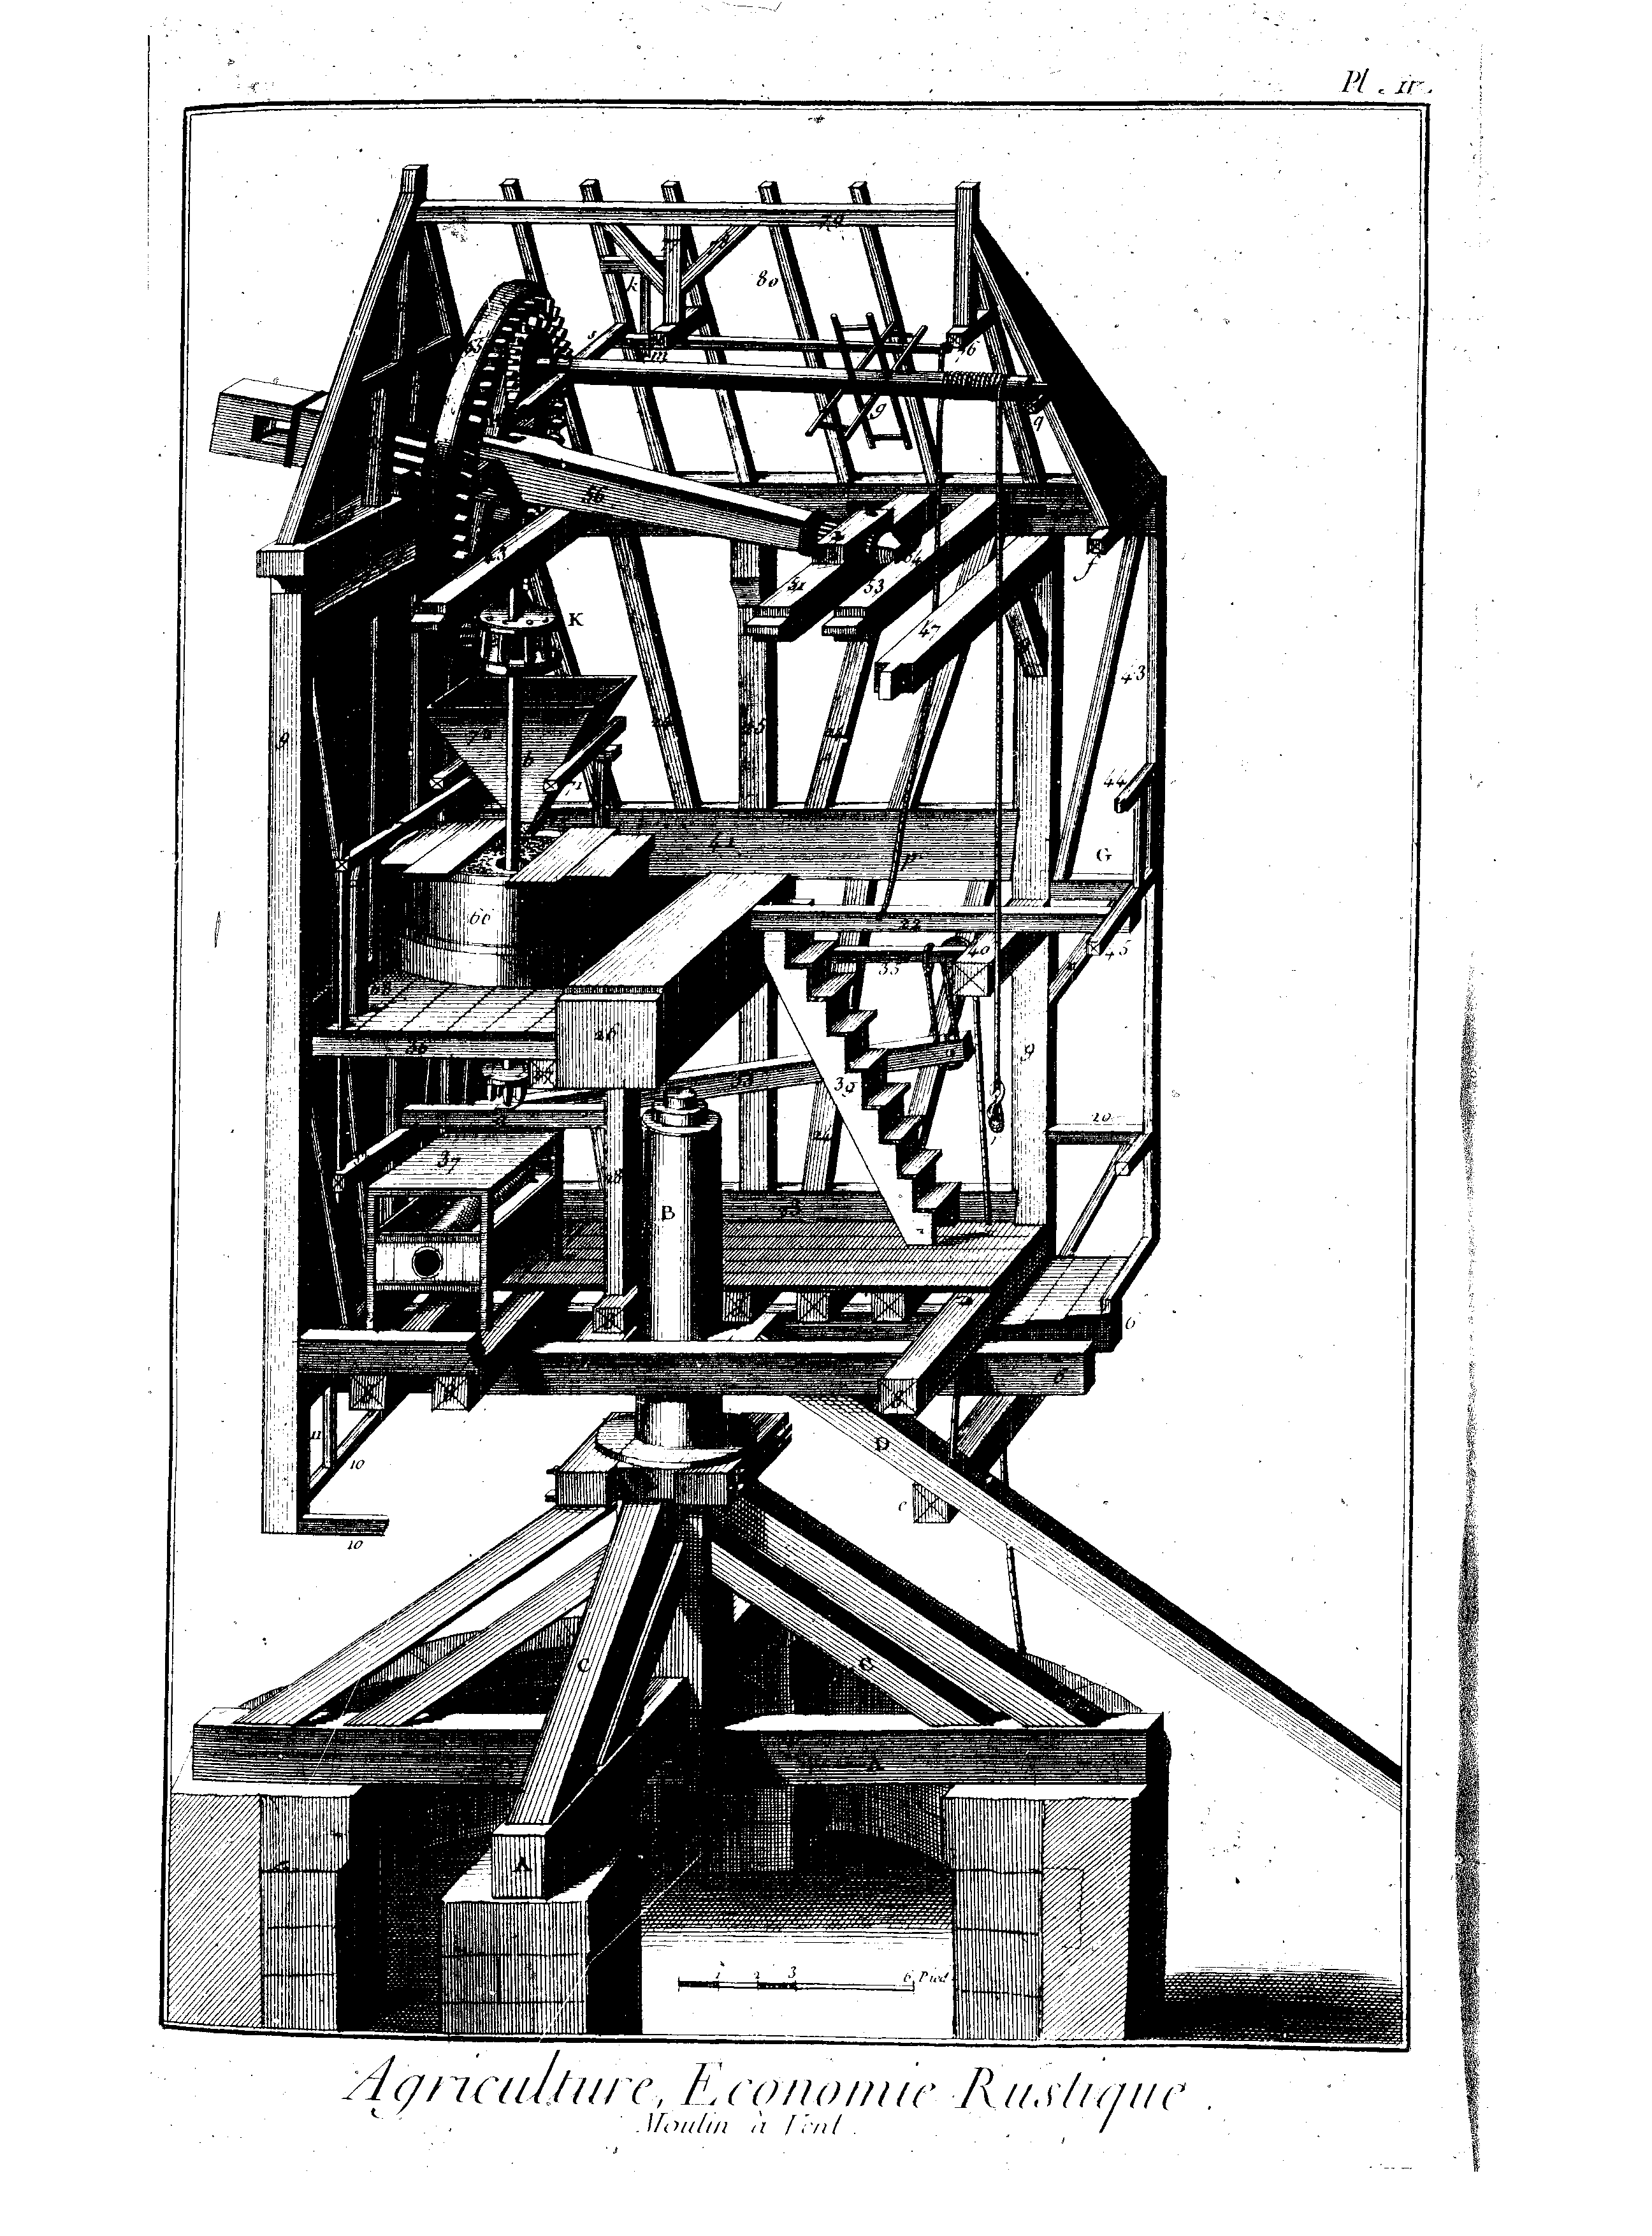 Cross section of a Post Mill